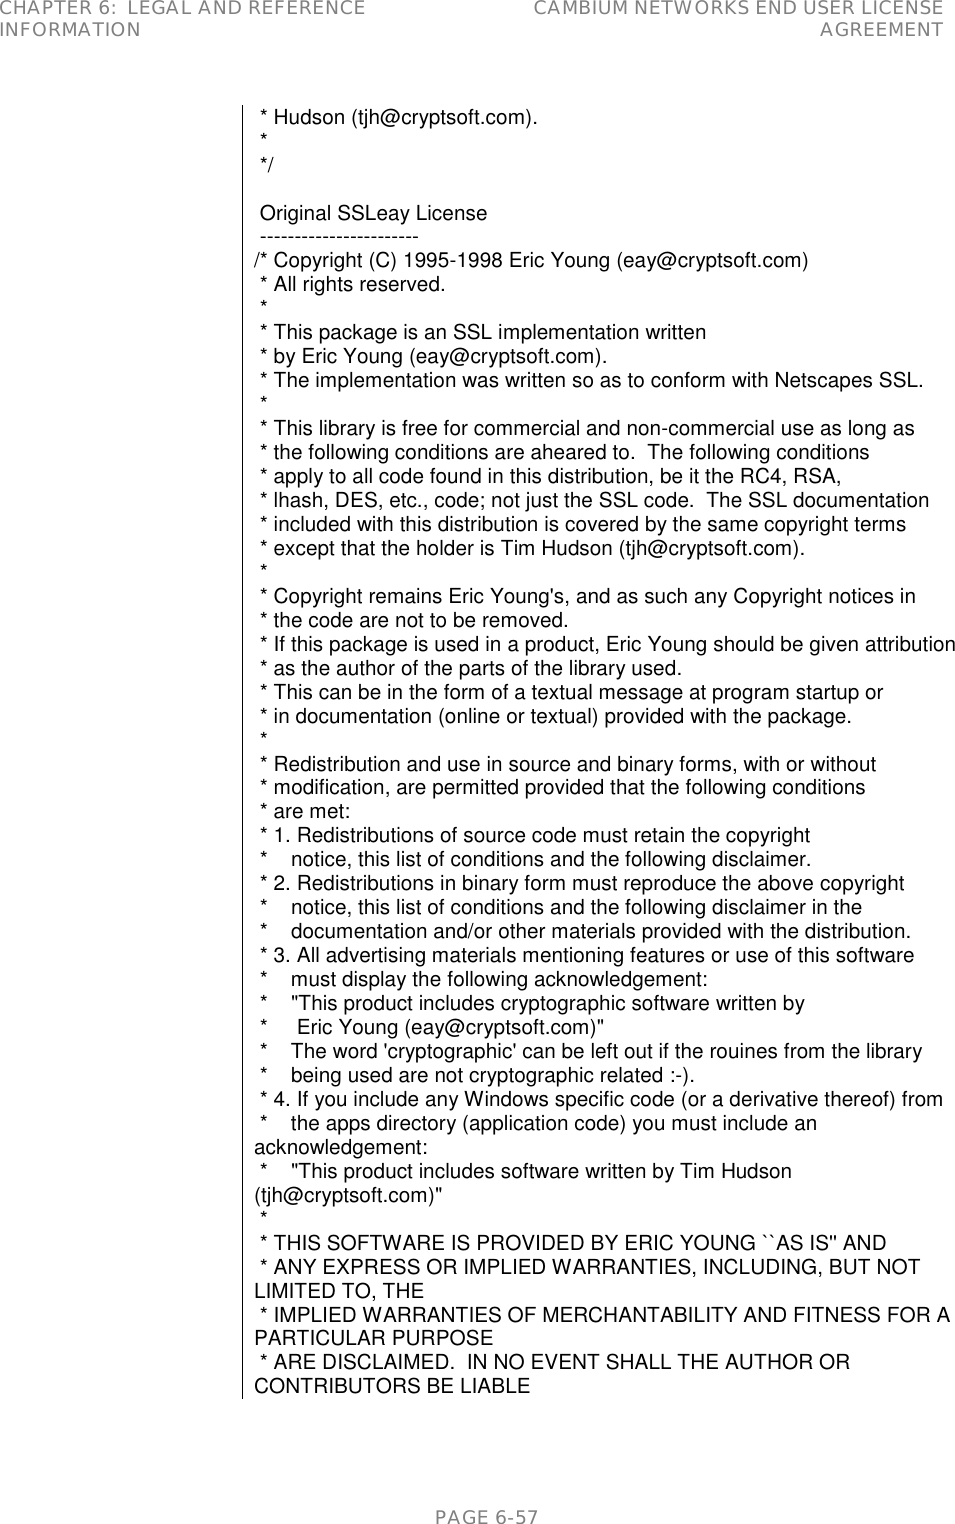 CHAPTER 6:  LEGAL AND REFERENCE INFORMATION CAMBIUM NETWORKS END USER LICENSE AGREEMENT   PAGE 6-57  * Hudson (tjh@cryptsoft.com).  *  */   Original SSLeay License  ----------------------- /* Copyright (C) 1995-1998 Eric Young (eay@cryptsoft.com)  * All rights reserved.  *  * This package is an SSL implementation written  * by Eric Young (eay@cryptsoft.com).  * The implementation was written so as to conform with Netscapes SSL.  *  * This library is free for commercial and non-commercial use as long as  * the following conditions are aheared to.  The following conditions  * apply to all code found in this distribution, be it the RC4, RSA,  * lhash, DES, etc., code; not just the SSL code.  The SSL documentation  * included with this distribution is covered by the same copyright terms  * except that the holder is Tim Hudson (tjh@cryptsoft.com).  *  * Copyright remains Eric Young&apos;s, and as such any Copyright notices in  * the code are not to be removed.  * If this package is used in a product, Eric Young should be given attribution  * as the author of the parts of the library used.  * This can be in the form of a textual message at program startup or  * in documentation (online or textual) provided with the package.  *  * Redistribution and use in source and binary forms, with or without  * modification, are permitted provided that the following conditions  * are met:  * 1. Redistributions of source code must retain the copyright  *    notice, this list of conditions and the following disclaimer.  * 2. Redistributions in binary form must reproduce the above copyright  *    notice, this list of conditions and the following disclaimer in the  *    documentation and/or other materials provided with the distribution.  * 3. All advertising materials mentioning features or use of this software  *    must display the following acknowledgement:  *    &quot;This product includes cryptographic software written by  *     Eric Young (eay@cryptsoft.com)&quot;  *    The word &apos;cryptographic&apos; can be left out if the rouines from the library  *    being used are not cryptographic related :-).  * 4. If you include any Windows specific code (or a derivative thereof) from  *    the apps directory (application code) you must include an acknowledgement:  *    &quot;This product includes software written by Tim Hudson (tjh@cryptsoft.com)&quot;  *  * THIS SOFTWARE IS PROVIDED BY ERIC YOUNG ``AS IS&apos;&apos; AND  * ANY EXPRESS OR IMPLIED WARRANTIES, INCLUDING, BUT NOT LIMITED TO, THE  * IMPLIED WARRANTIES OF MERCHANTABILITY AND FITNESS FOR A PARTICULAR PURPOSE  * ARE DISCLAIMED.  IN NO EVENT SHALL THE AUTHOR OR CONTRIBUTORS BE LIABLE 